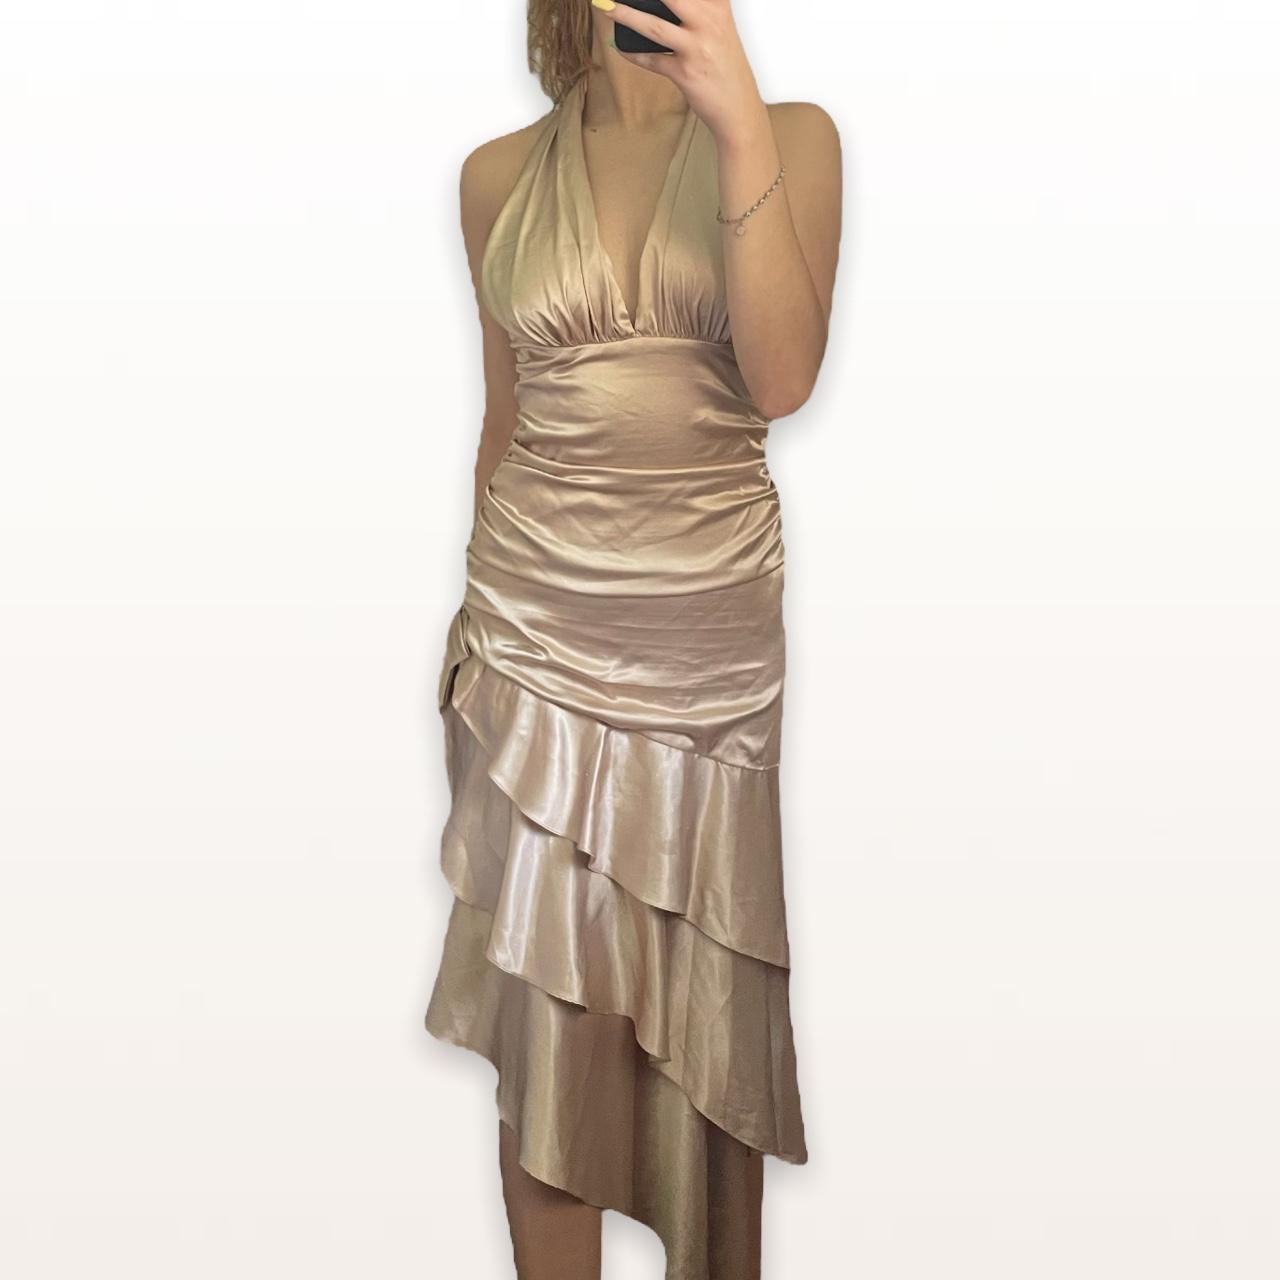 Product Image 1 - 90s champagne evening gown 🥂
-